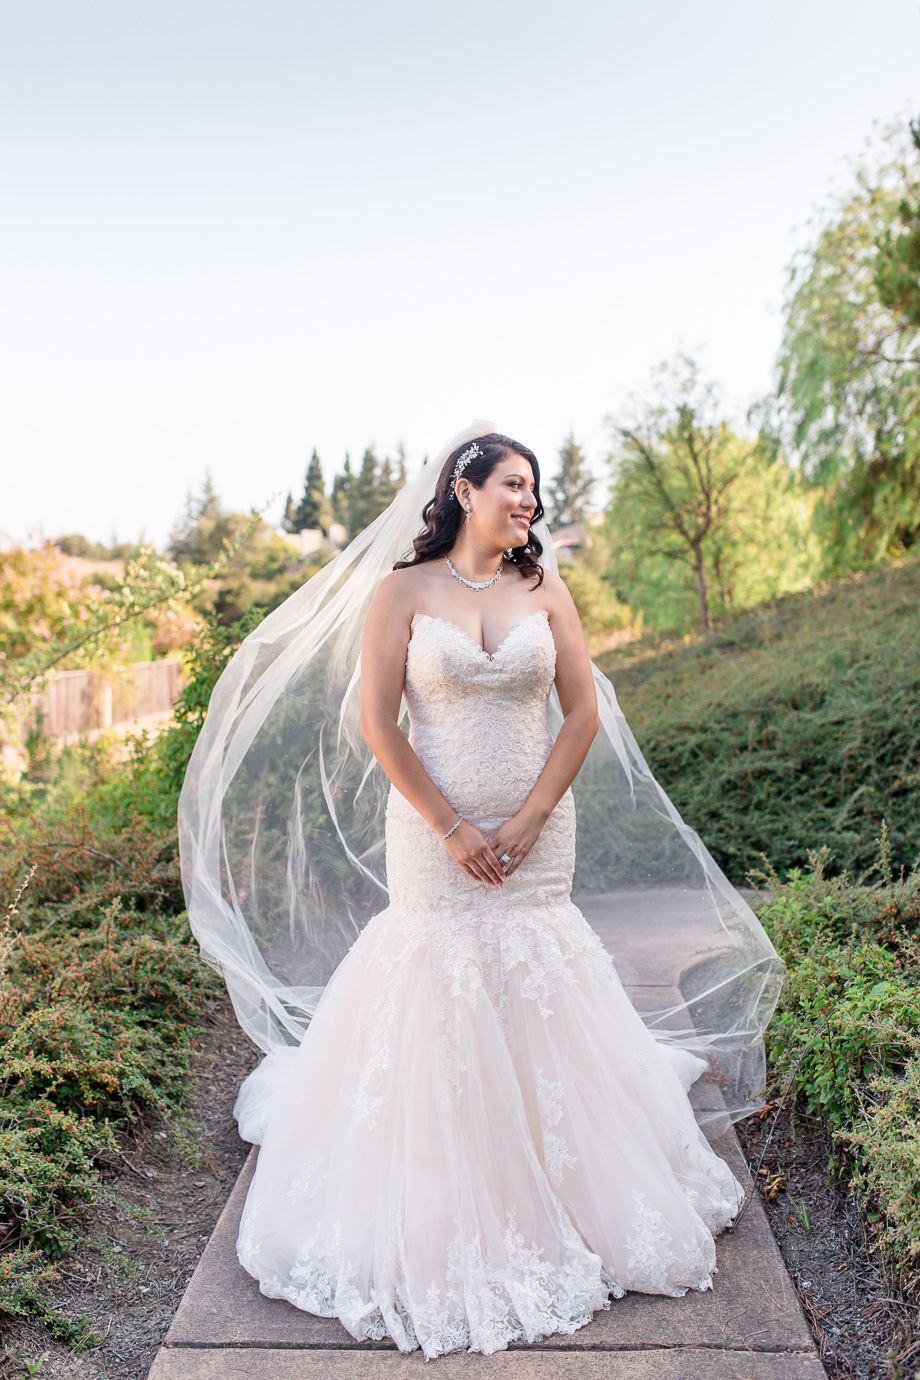 stunning bridal portrait with chapel length veil flying in the wind - bay area wedding